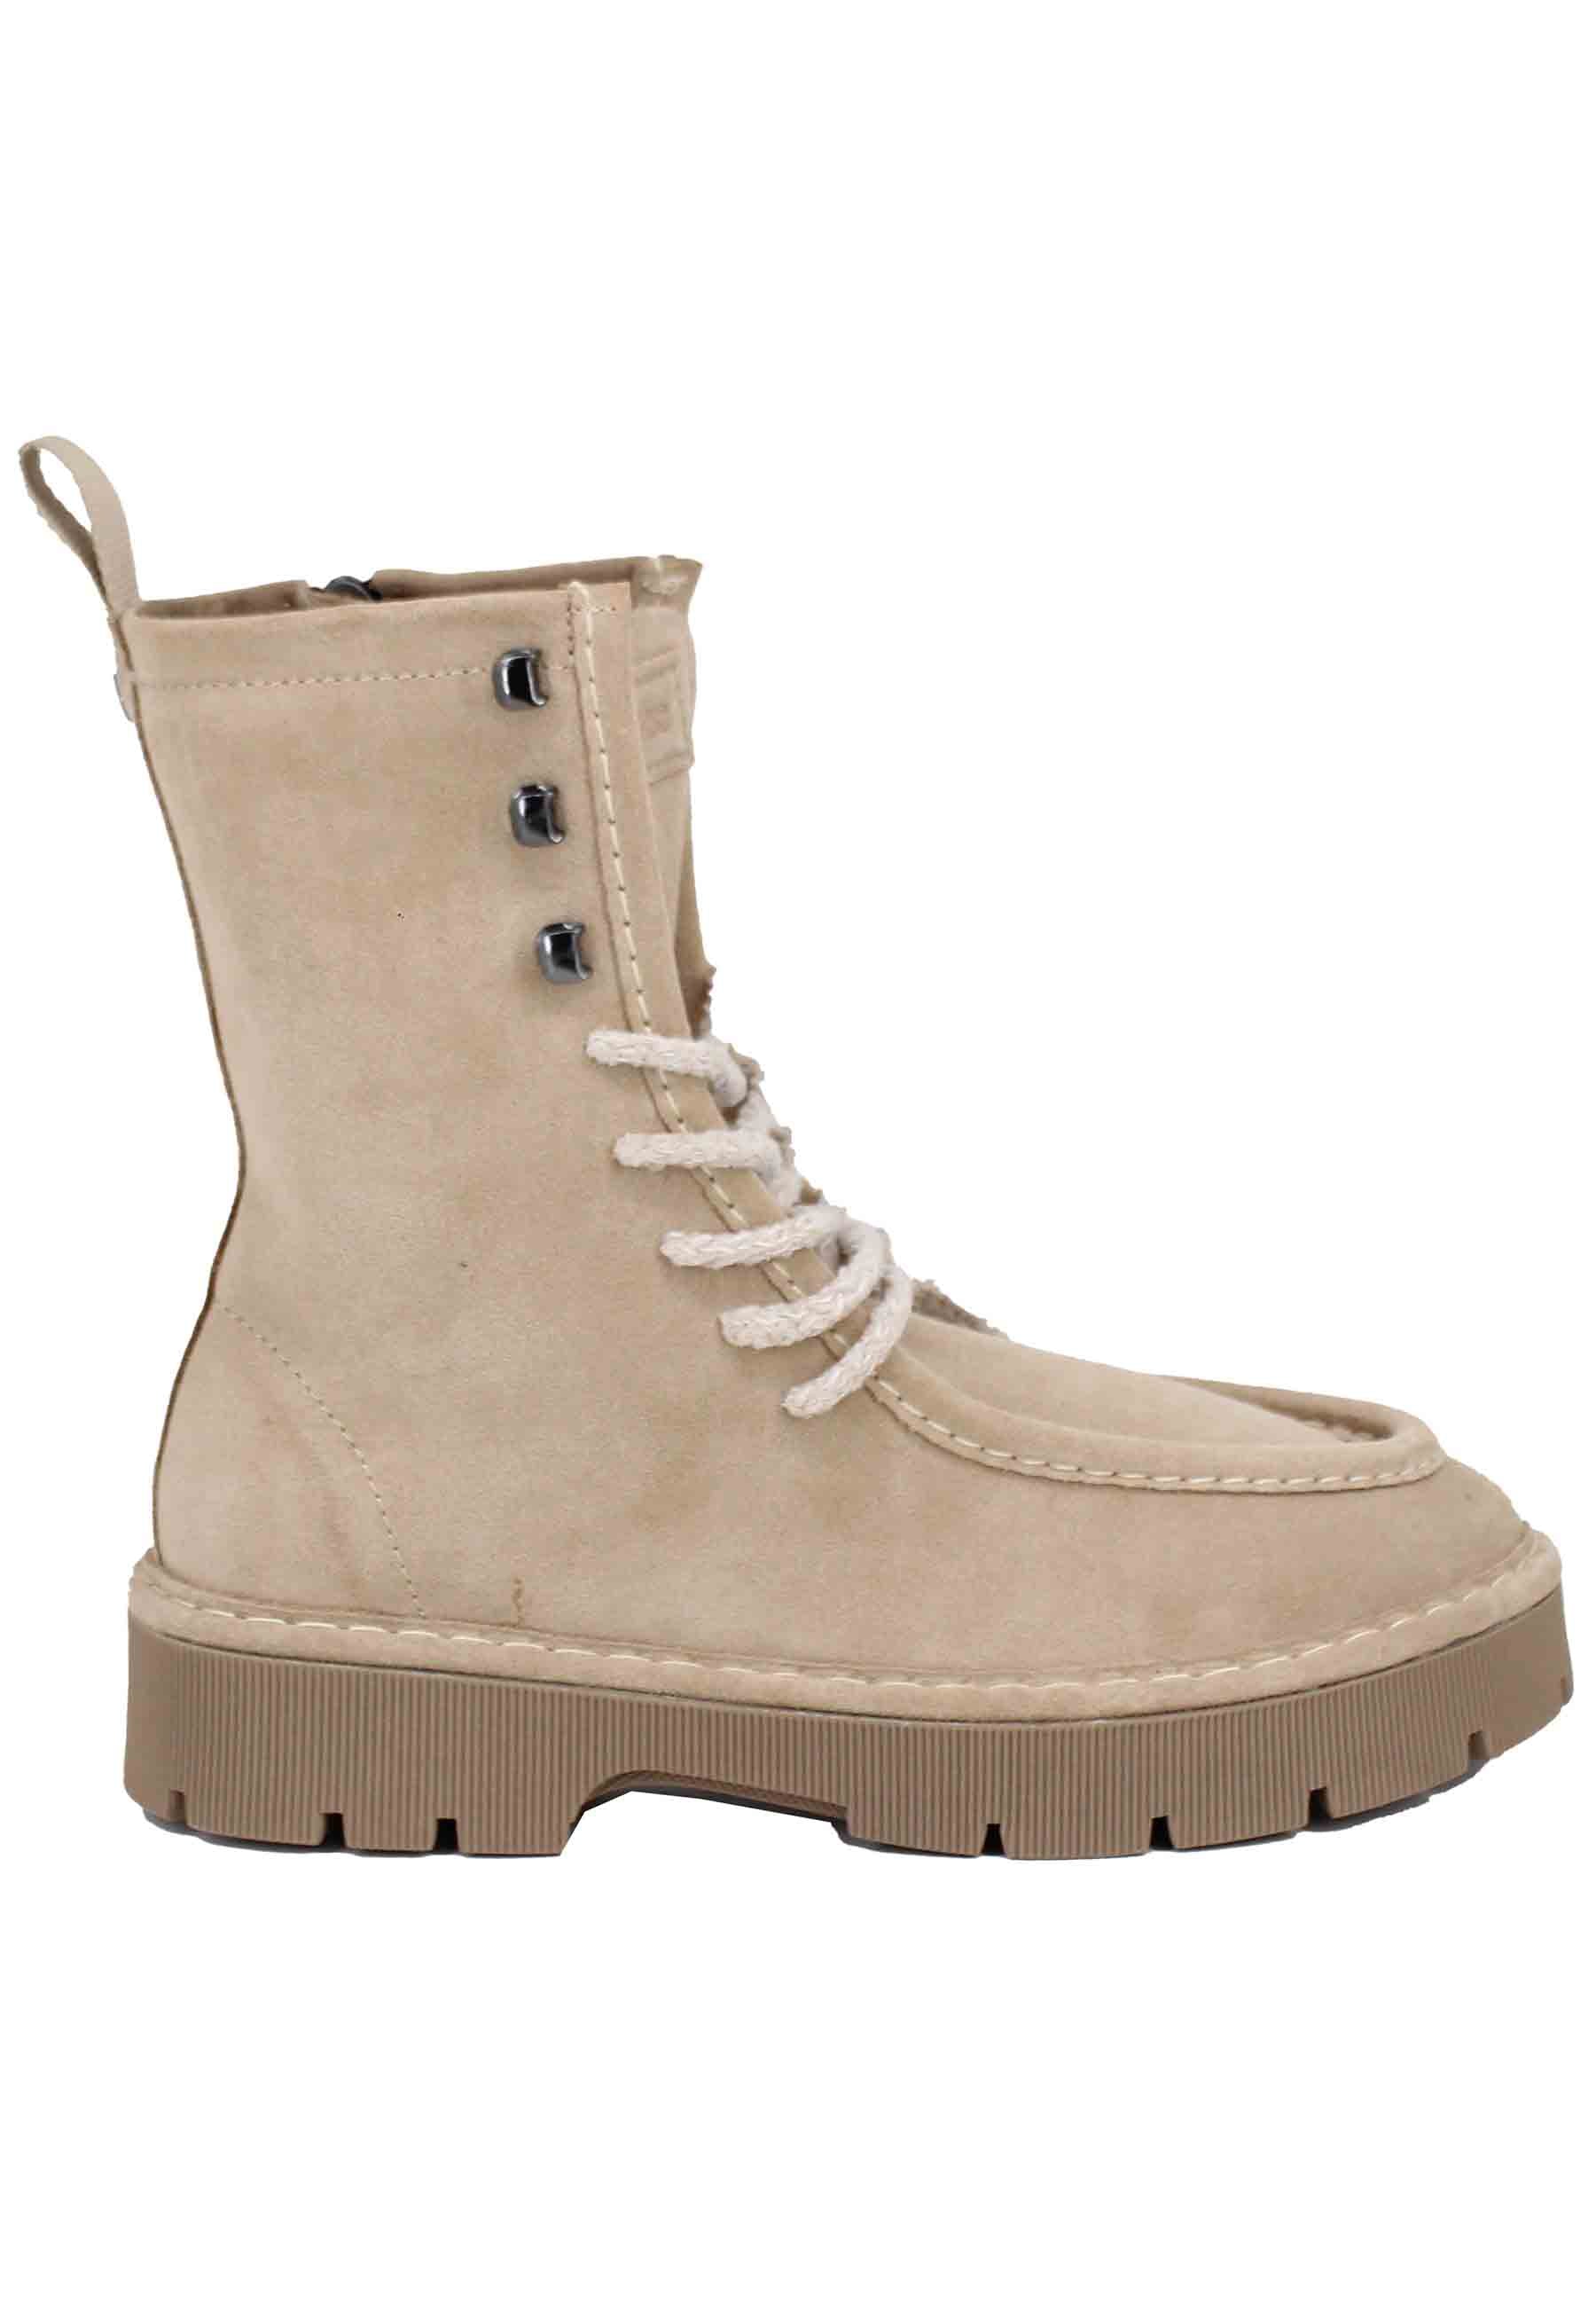 Women's combat lace-up ankle boots in beige suede